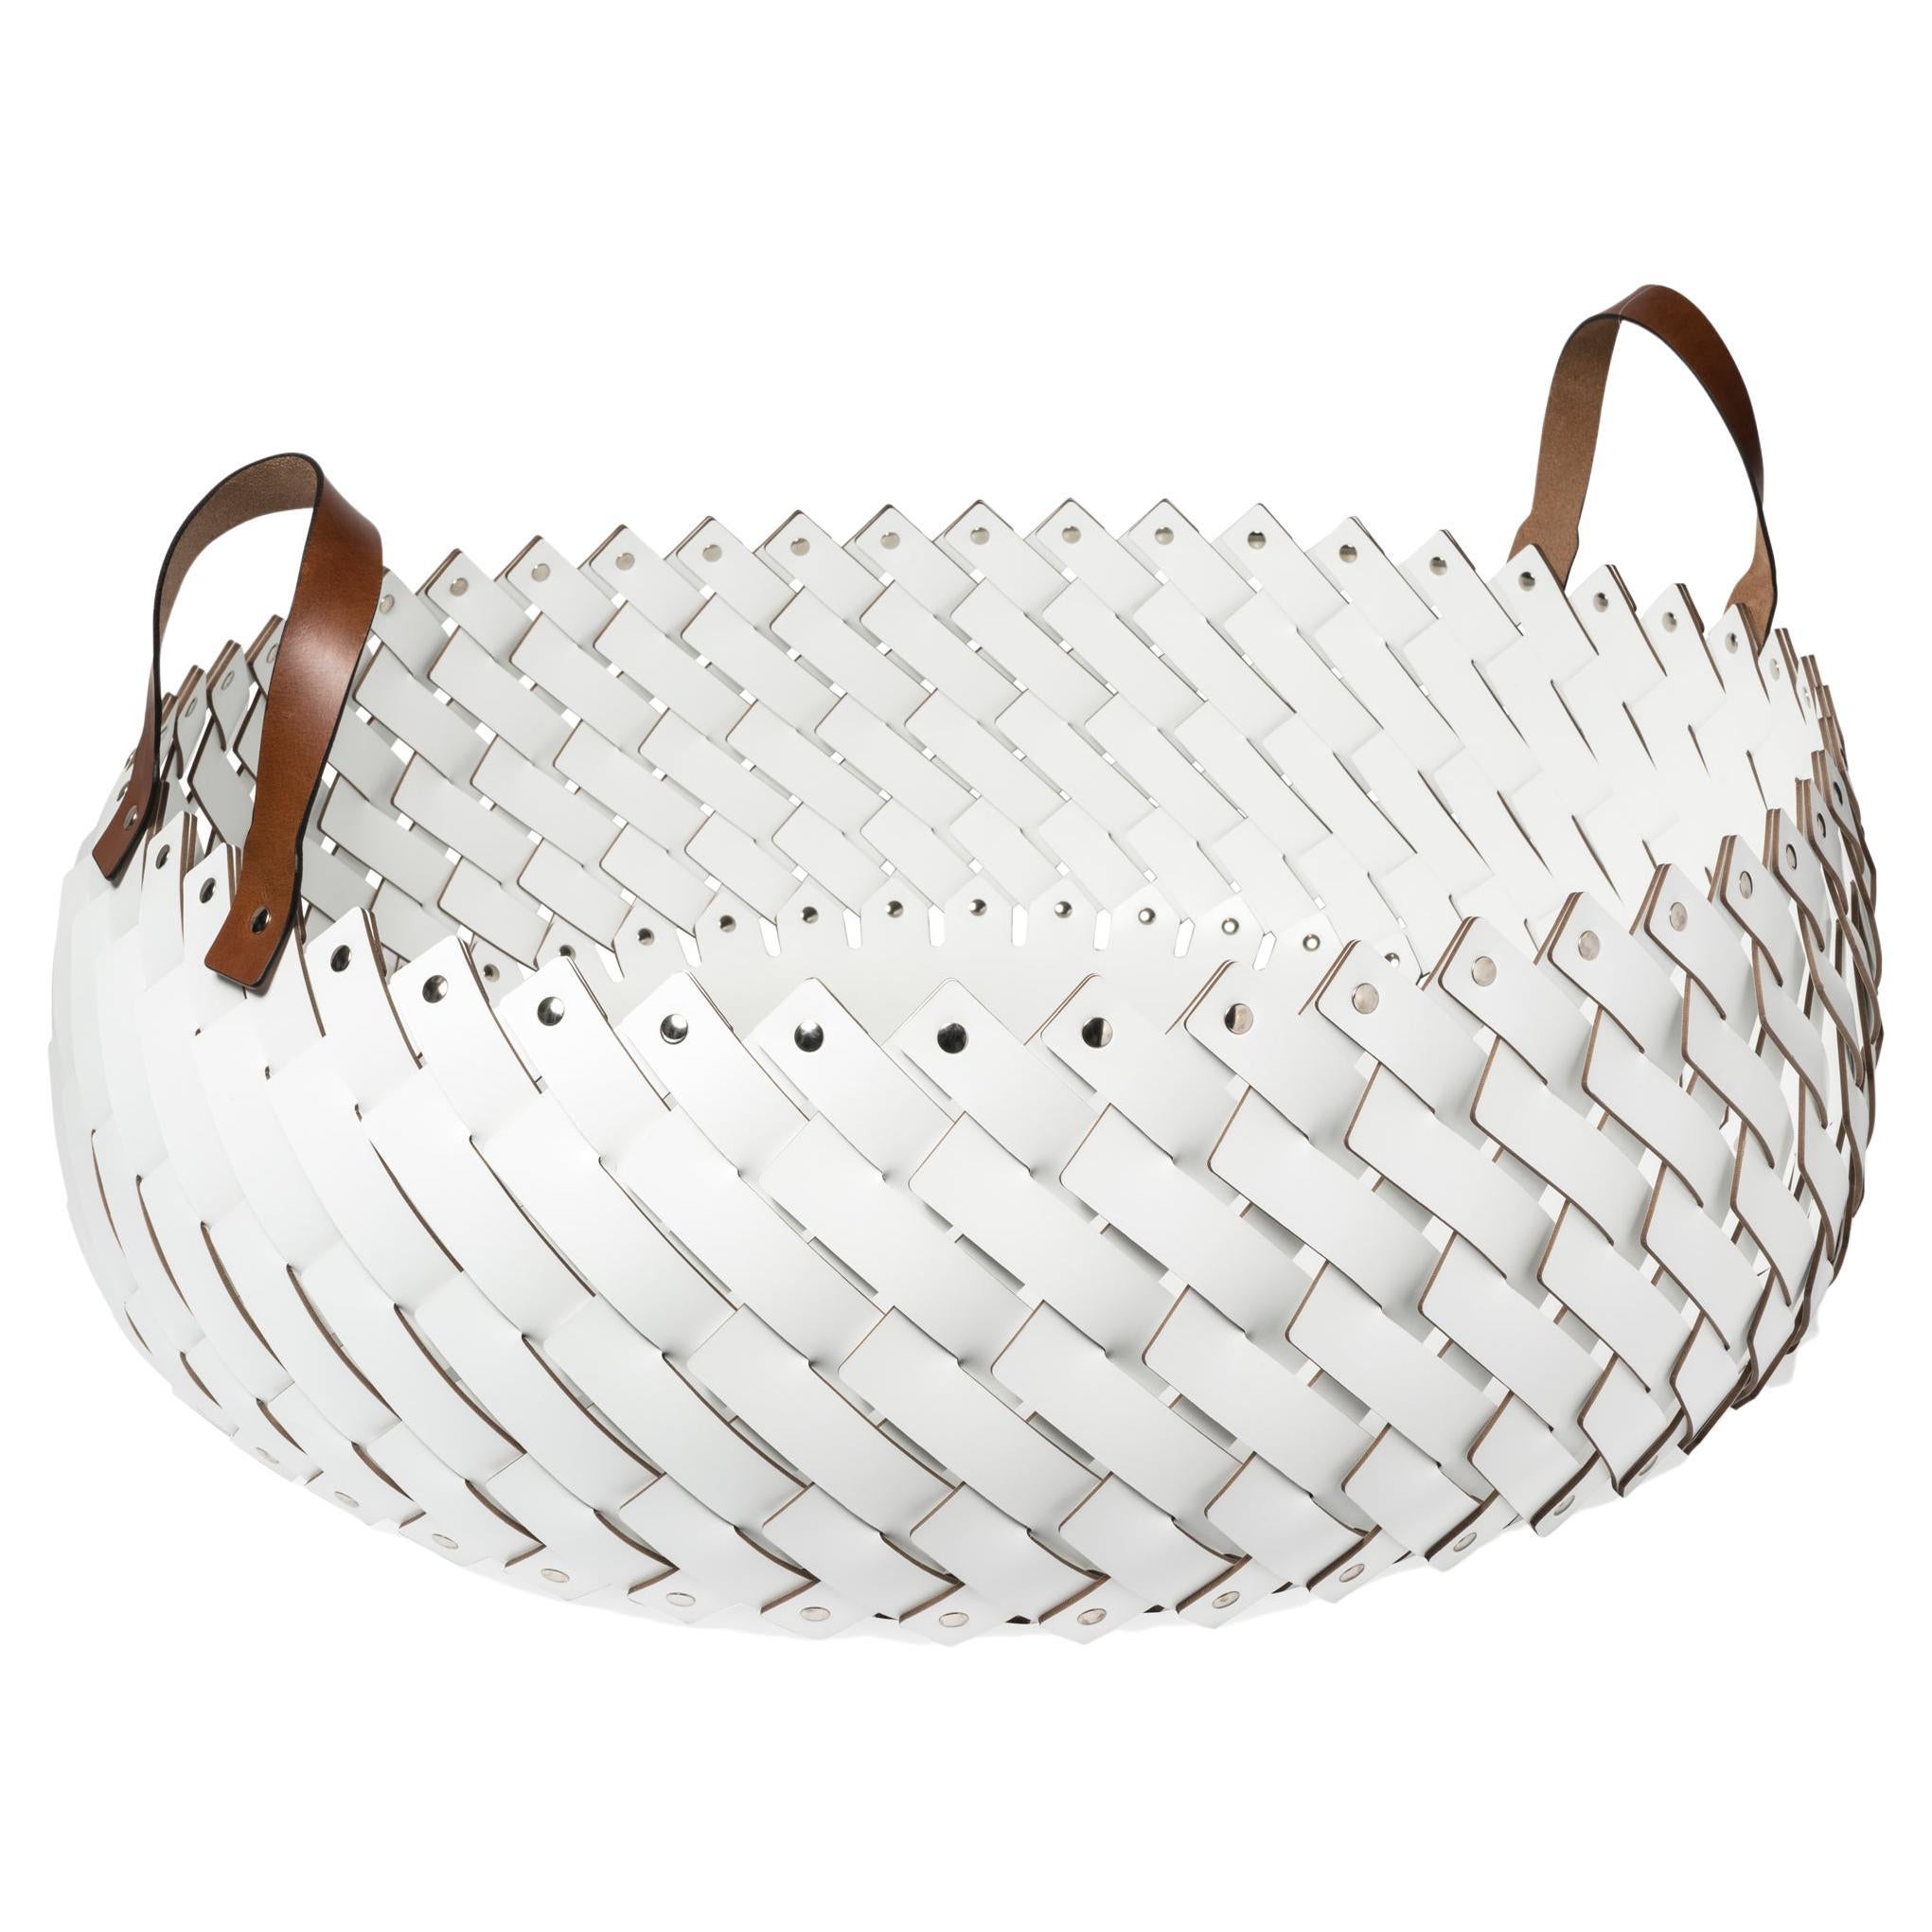 21st Century Almeria Large Towel and Shoes Handwoven Basket with Handles